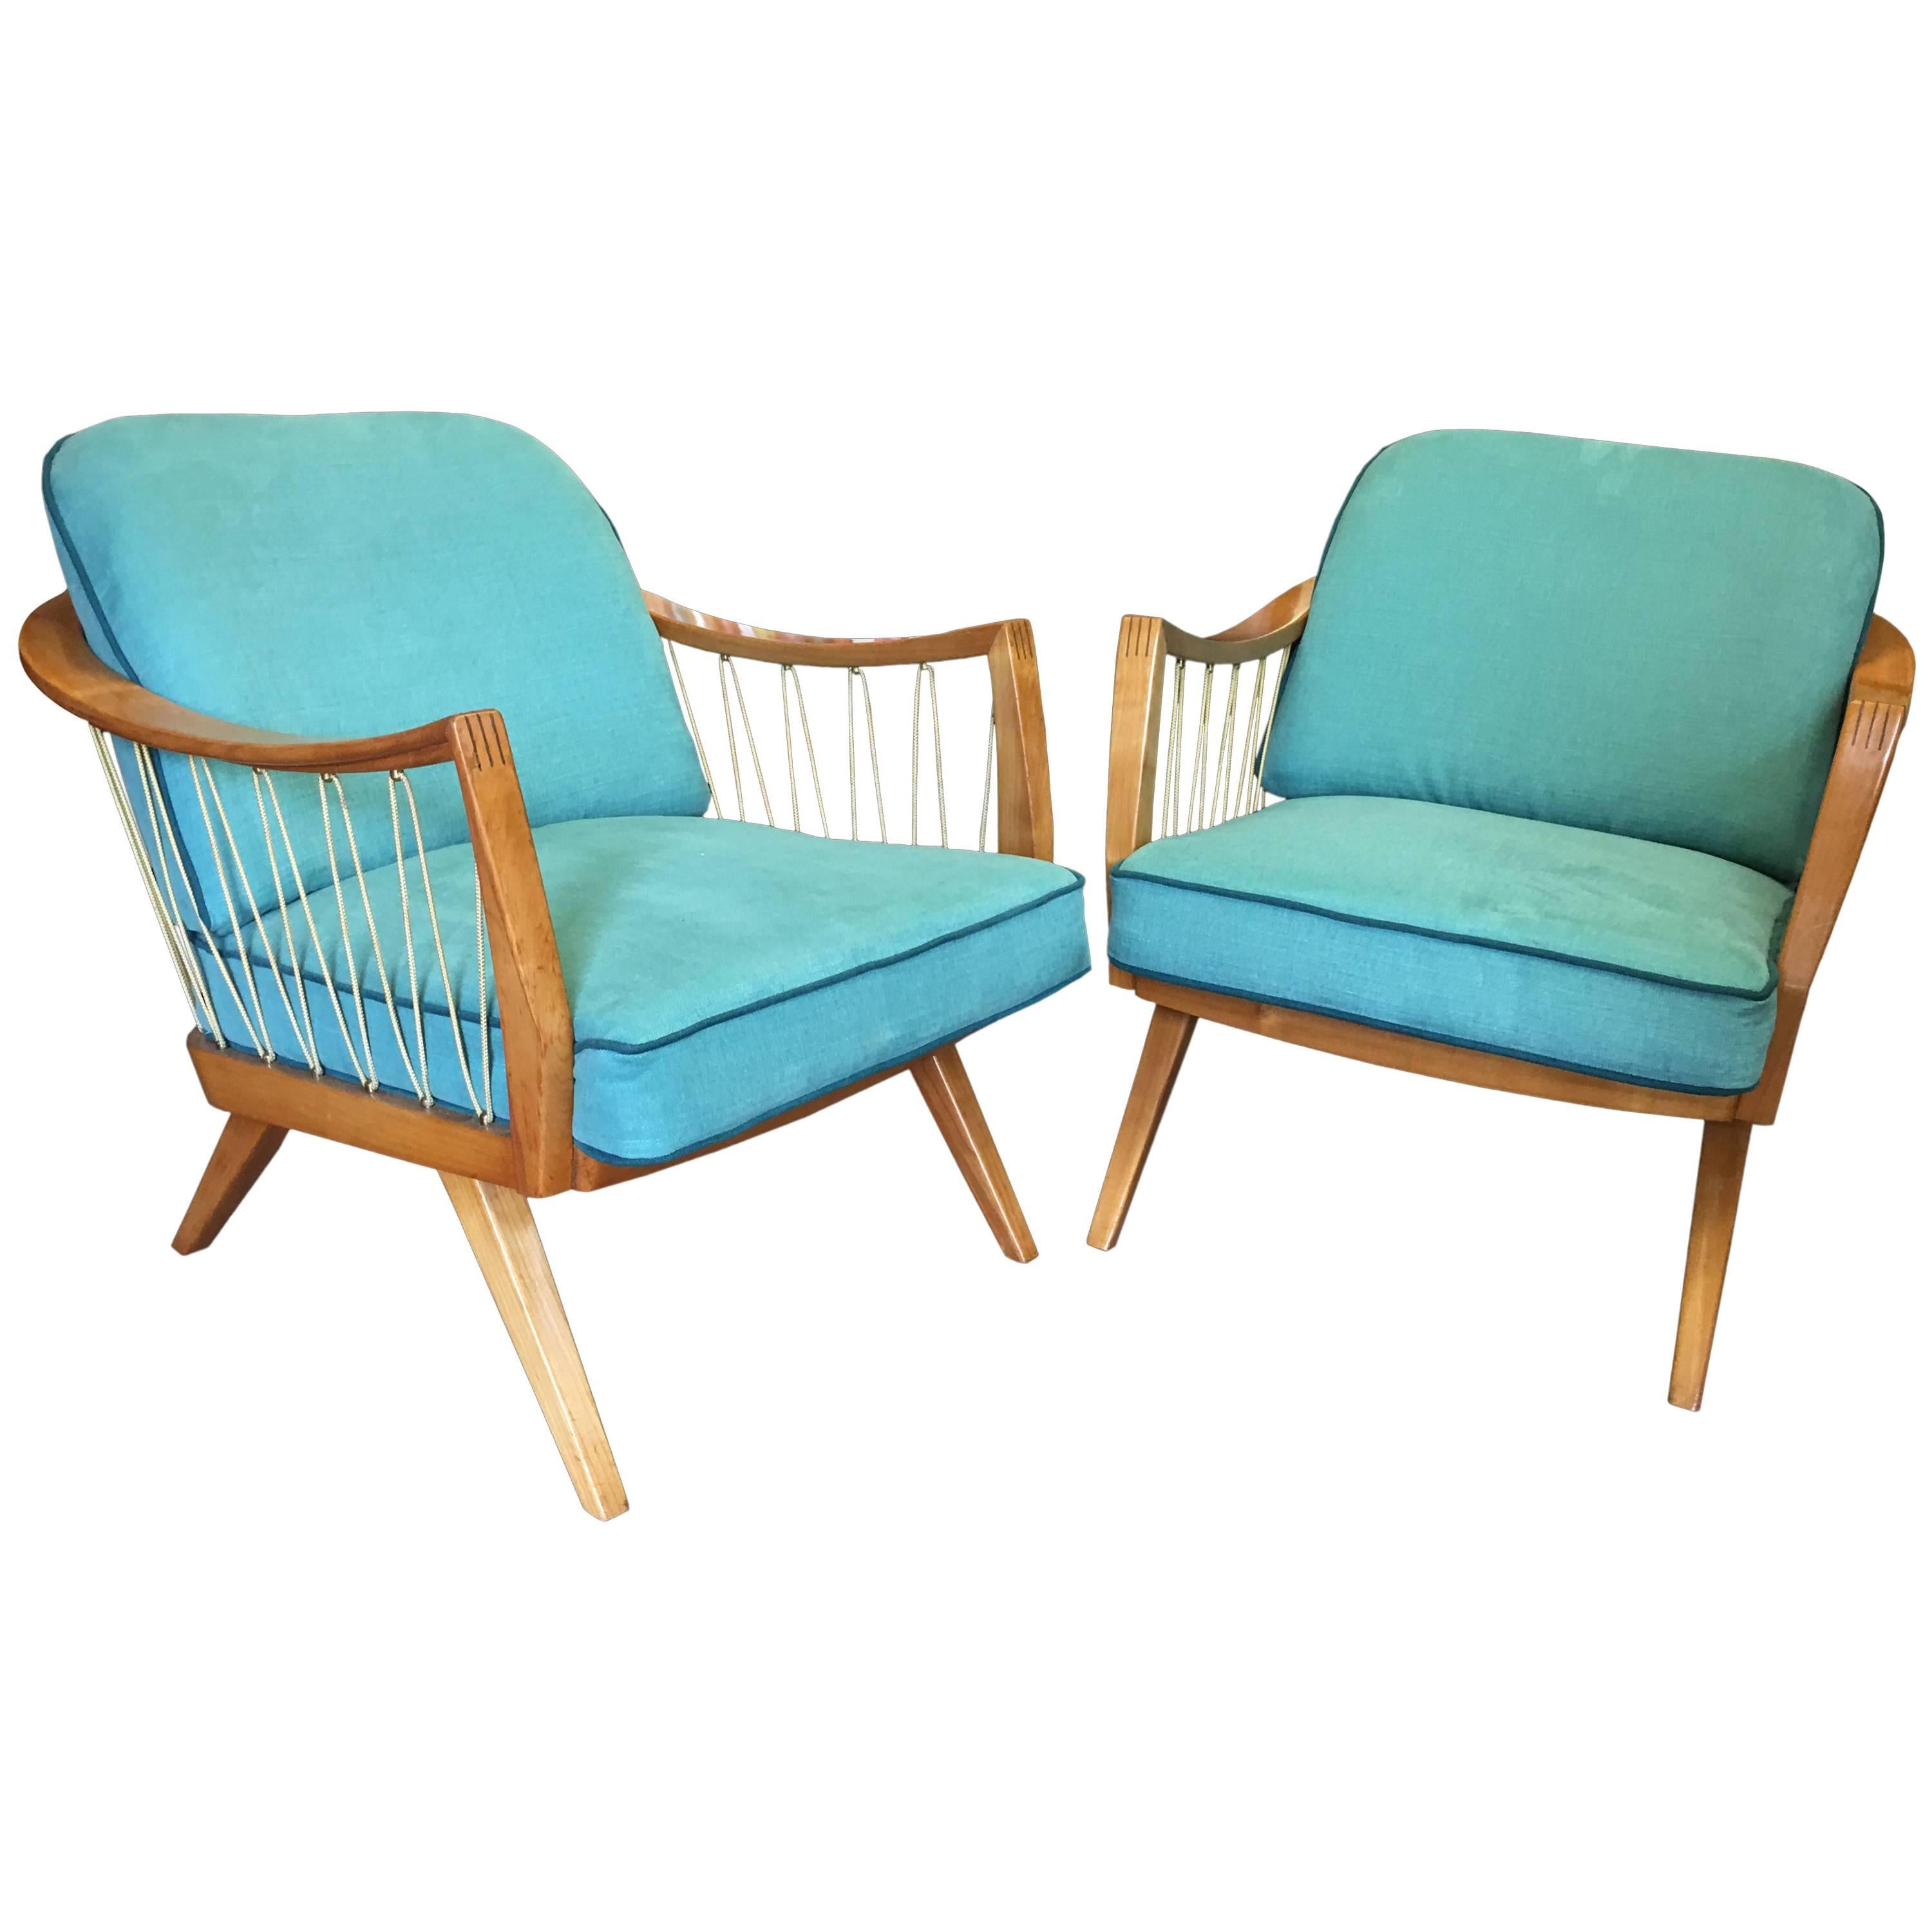 Stunning Pair of Cherry Framed Midcentury Lounge Chairs